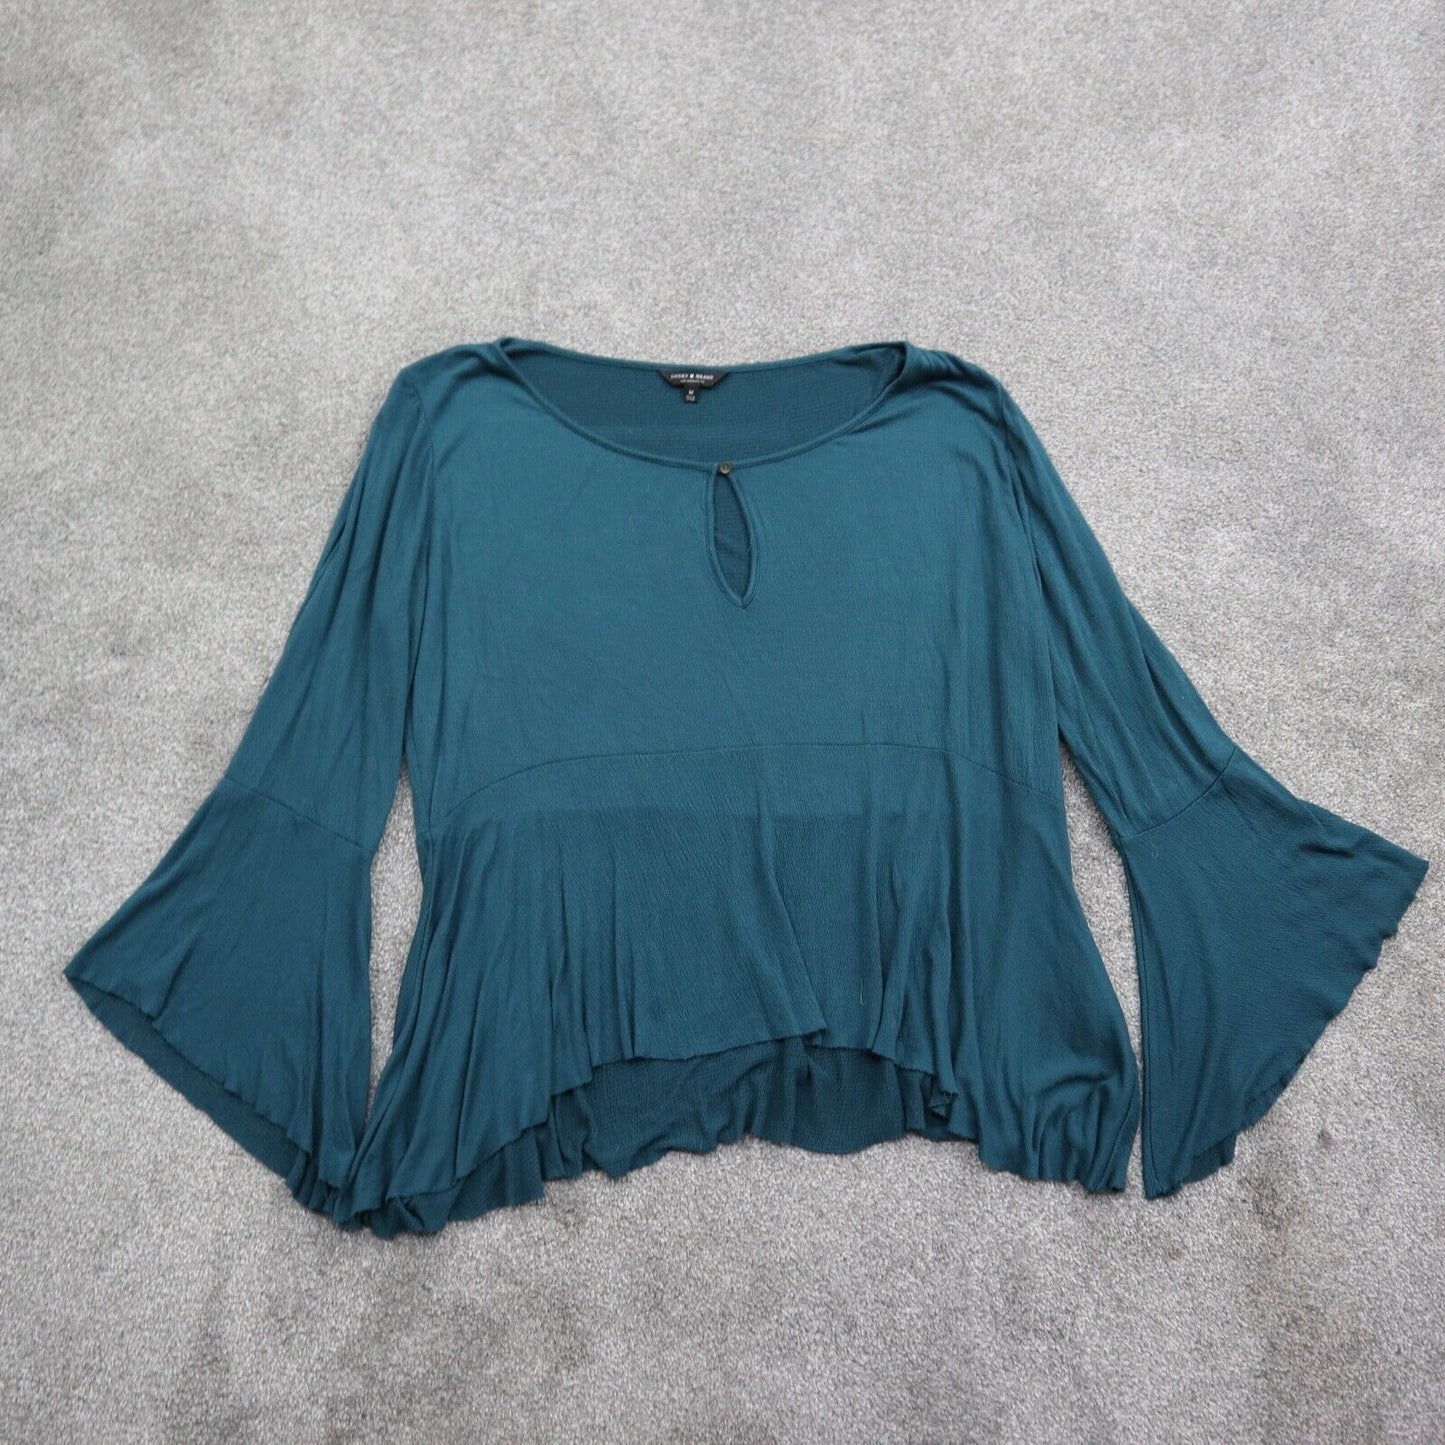 Ann Taylor Womens Bell Sleeve Blouse Top Round Neck Front Keyhole Teal Blue Sz M